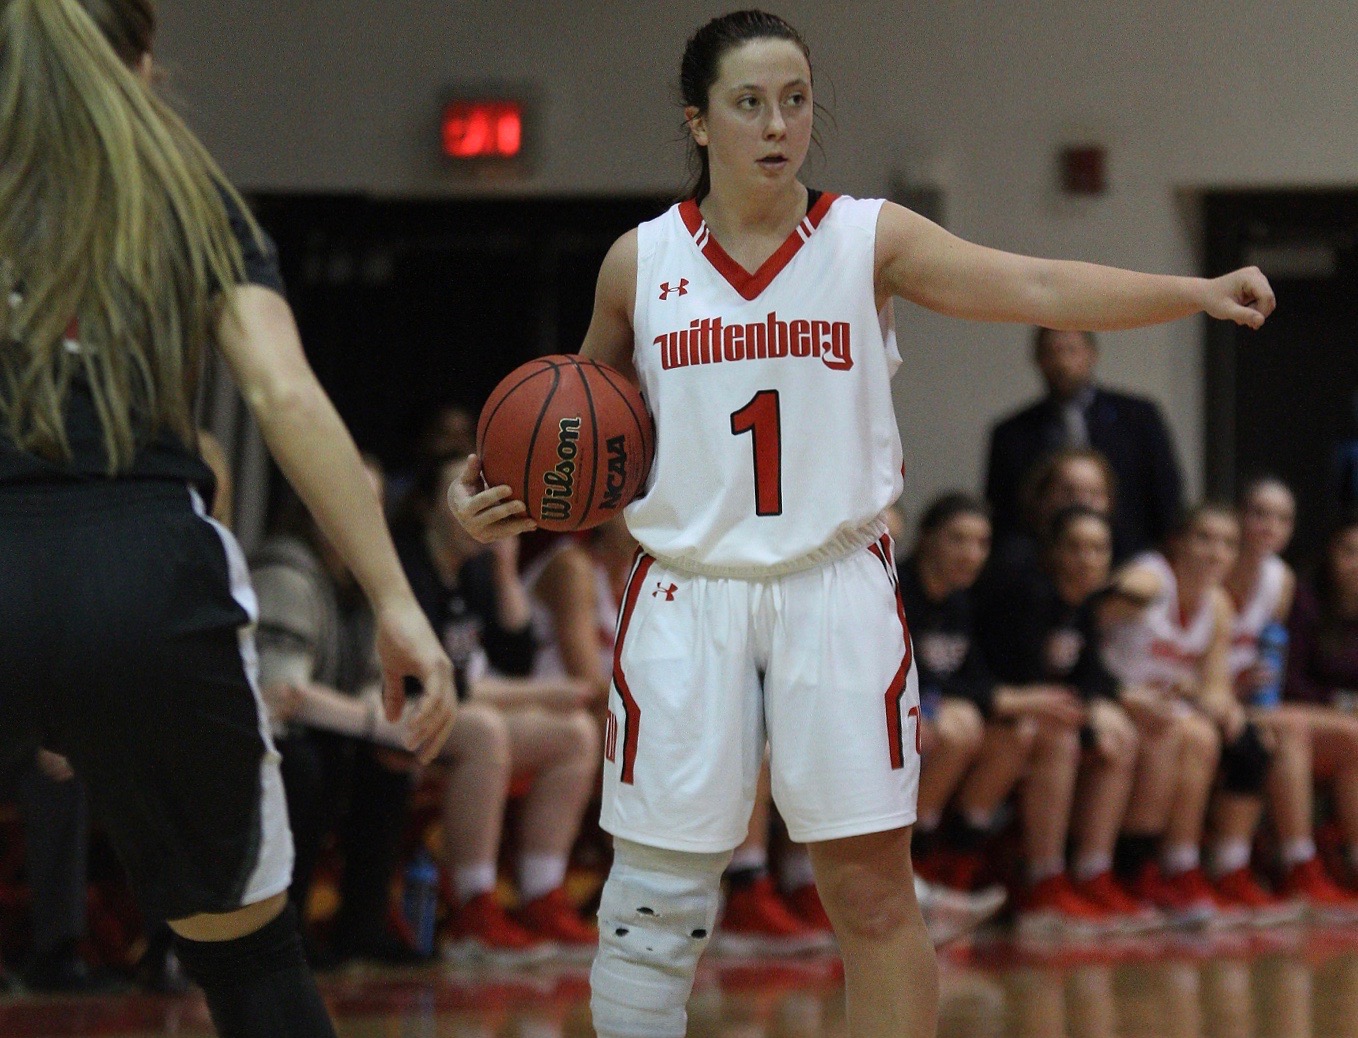 Sophomore Delaney Williams hit a clutch three-pointer at the end of regulation, but Denison knocked down a bucket with 0.9 seconds left in double OT to give the Big Red a 78-76 win over the Tigers